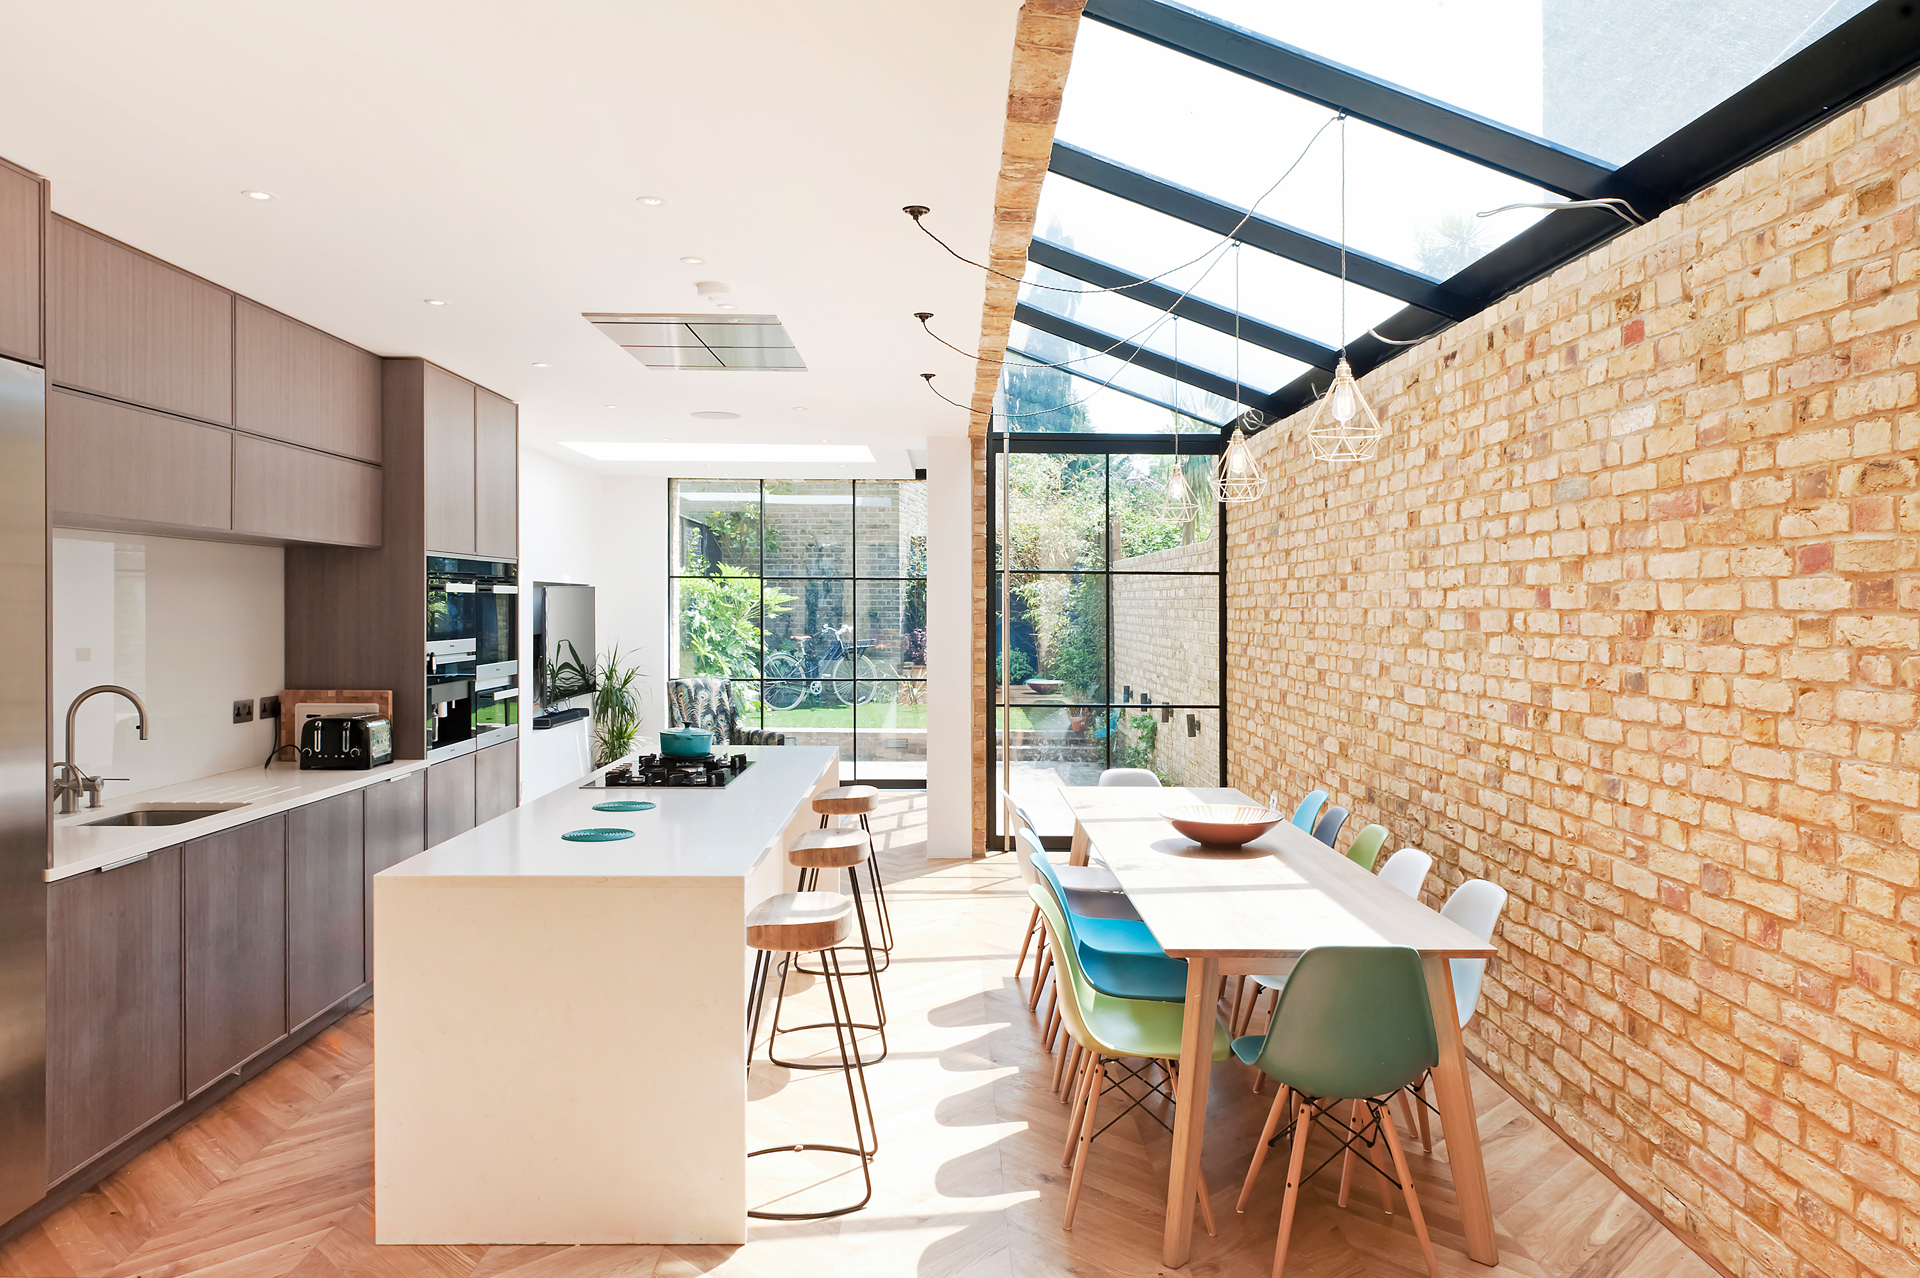 </p> <p>Find your ideal home design pro on designfor-me.com - get matched and see who's interested in your home project. Click image to see more inspiration from our design pros</p> <p>Design by Ash, architect from Lambeth, London</p> <p>#architecture #homedesign #modernhomes #homeinspiration #kitchens #kitchendesign #kitcheninspiration #kitchenideas #kitchengoals #sideextensions #sidereturn #sideextensionideas #skylights #rooflights </p> <p>